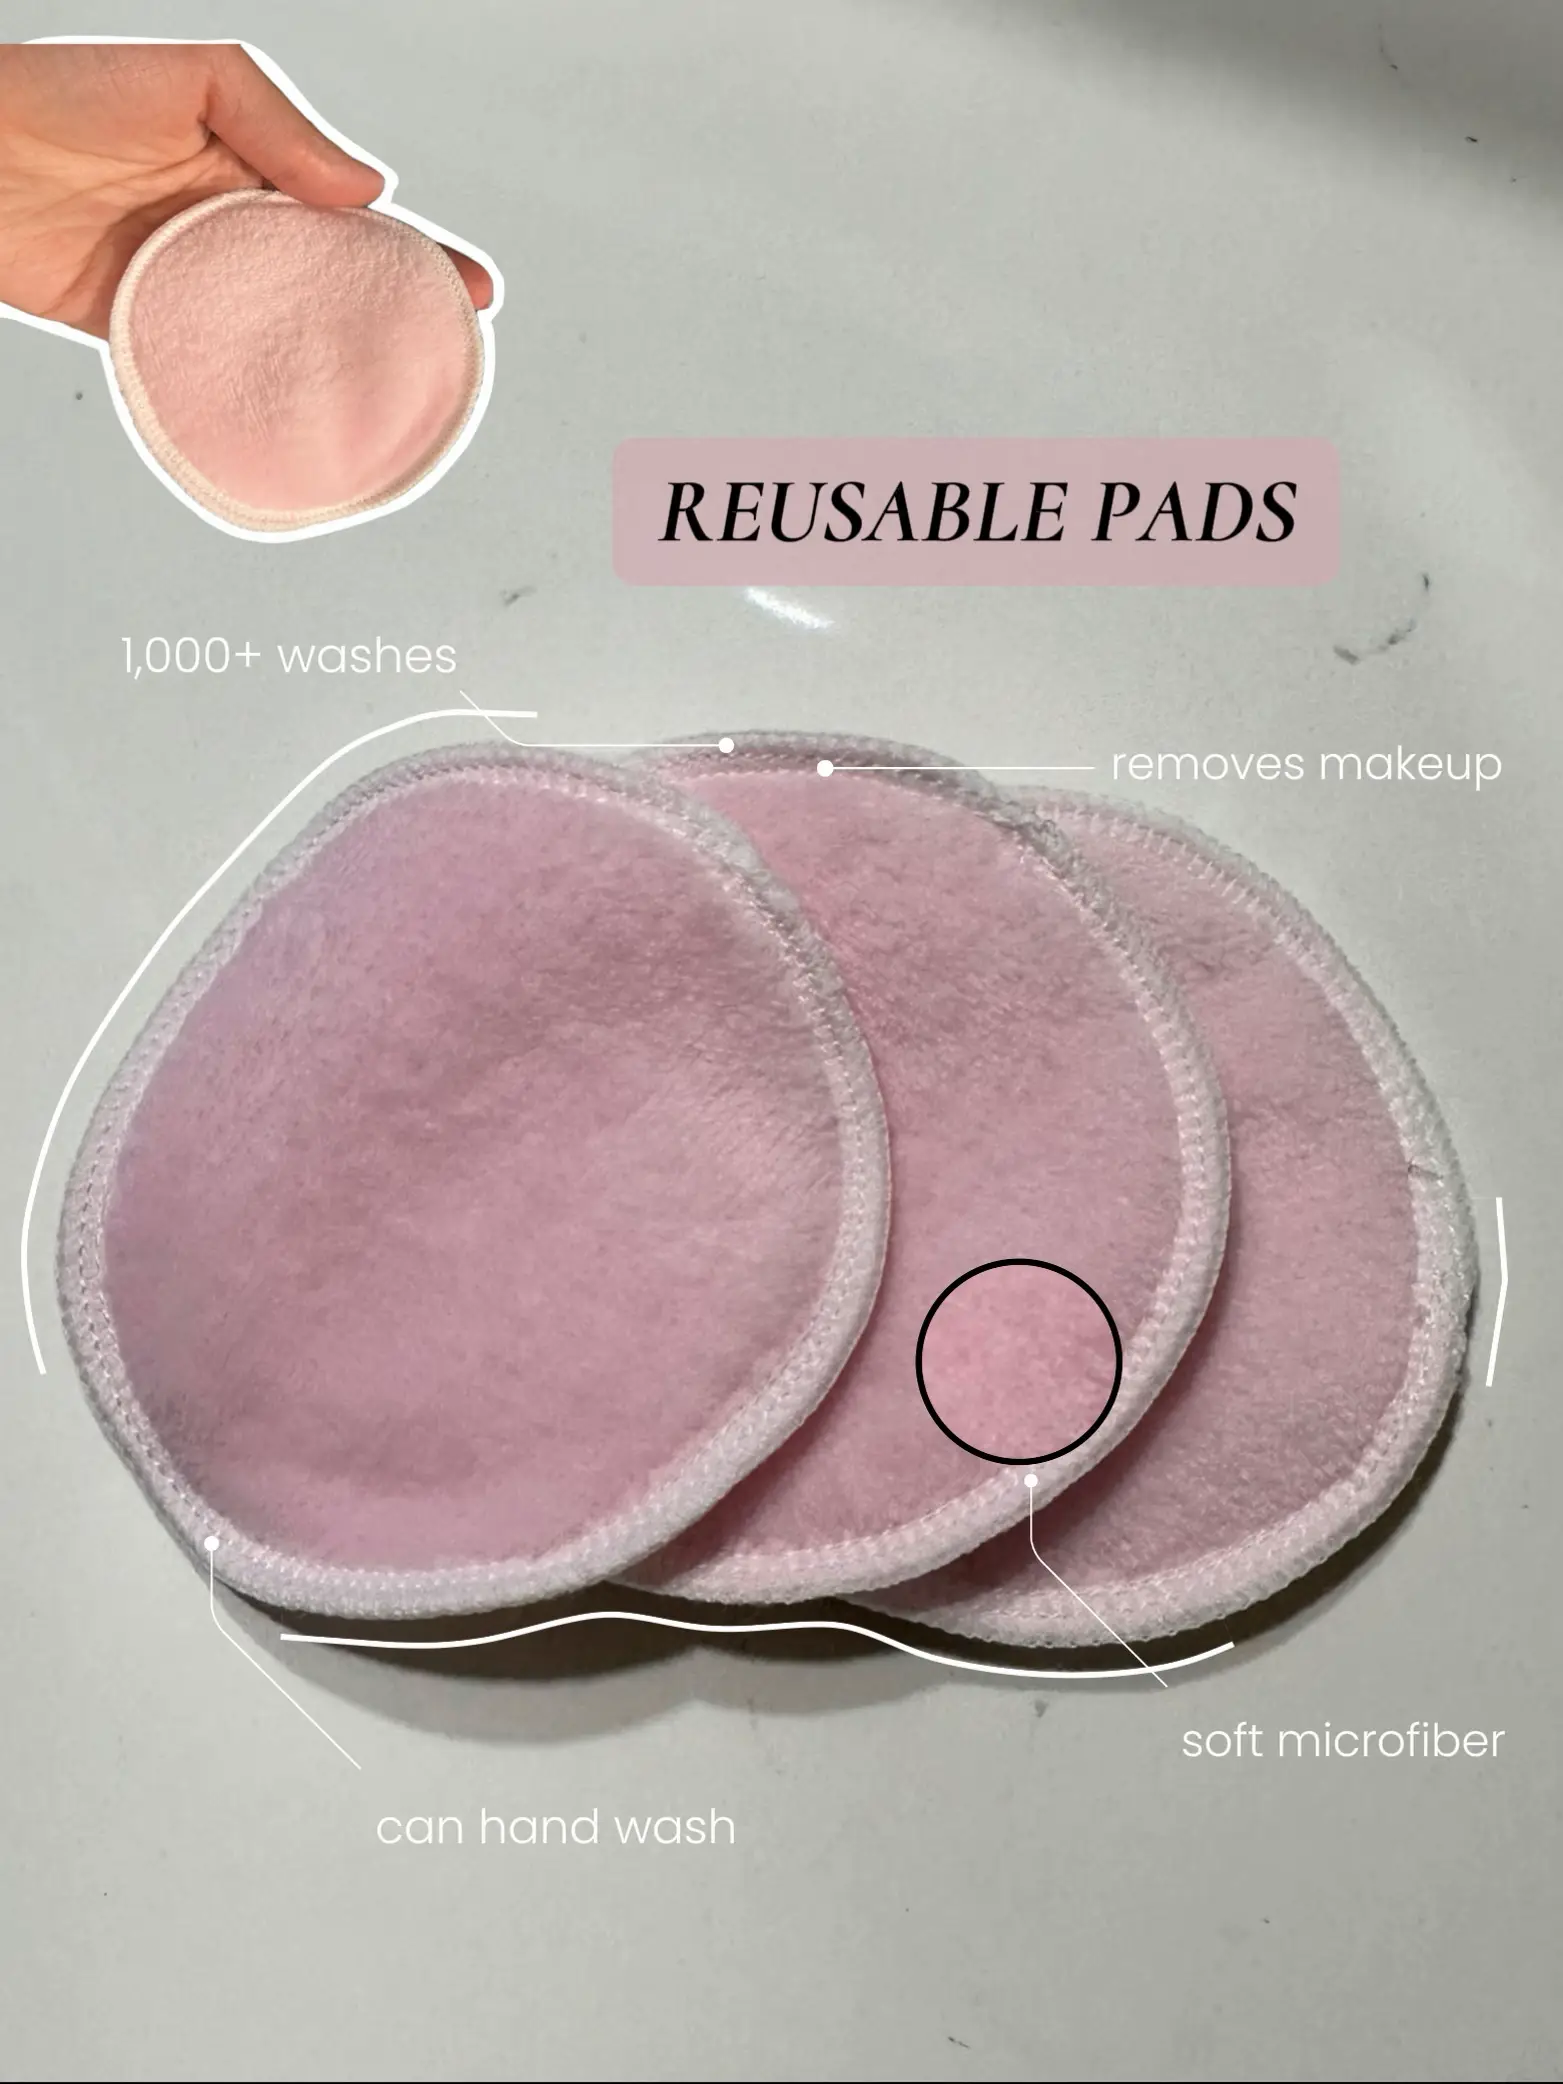 Reusable Sanitary Pads - How To Make And Use Them ⋆ A Rose Tinted World